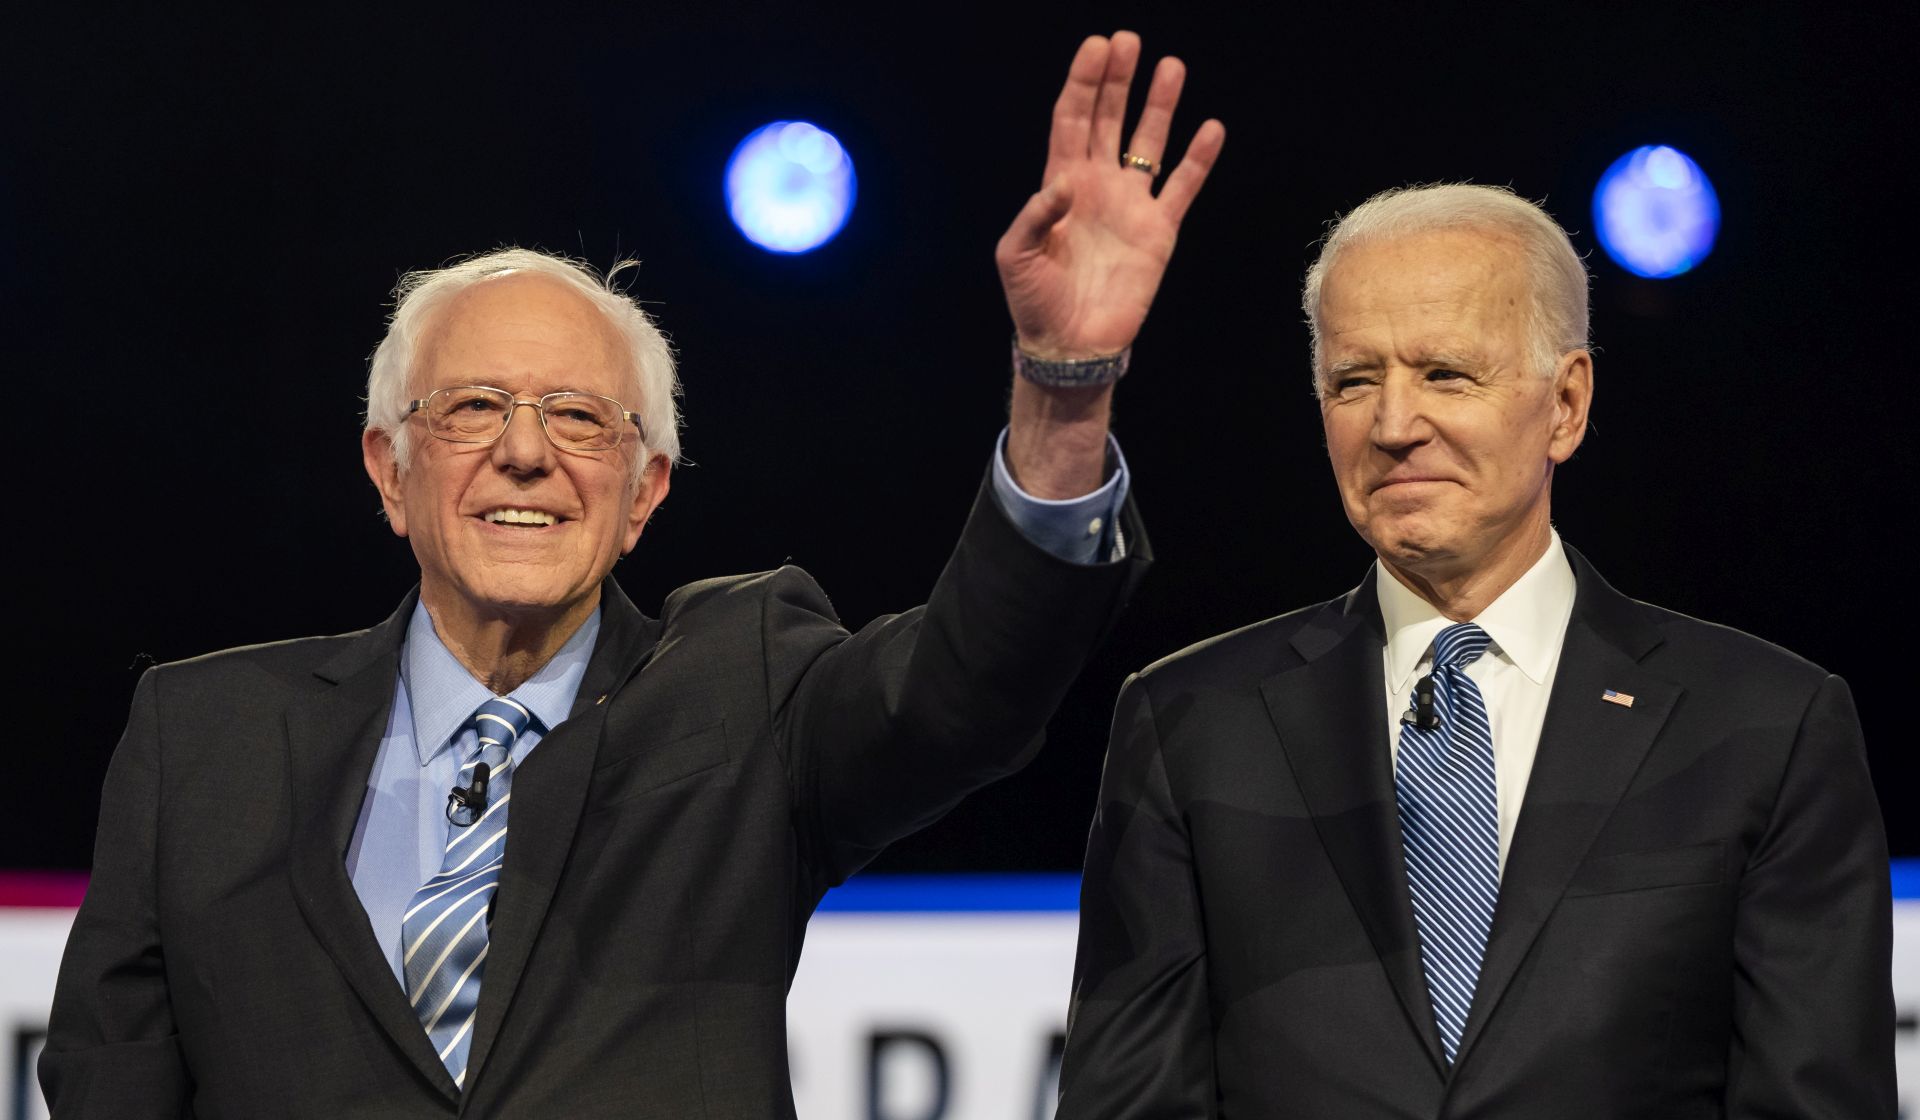 epaselect Democratic presidential candidates Bernie Sanders (L) and Joe Biden (R) stand on stage during the tenth Democratic presidential debate at the Gaillard Center in Charleston, South Carolina, USA, 25 February, 2020. The South Carolina primary is scheduled for 29 February 2020.